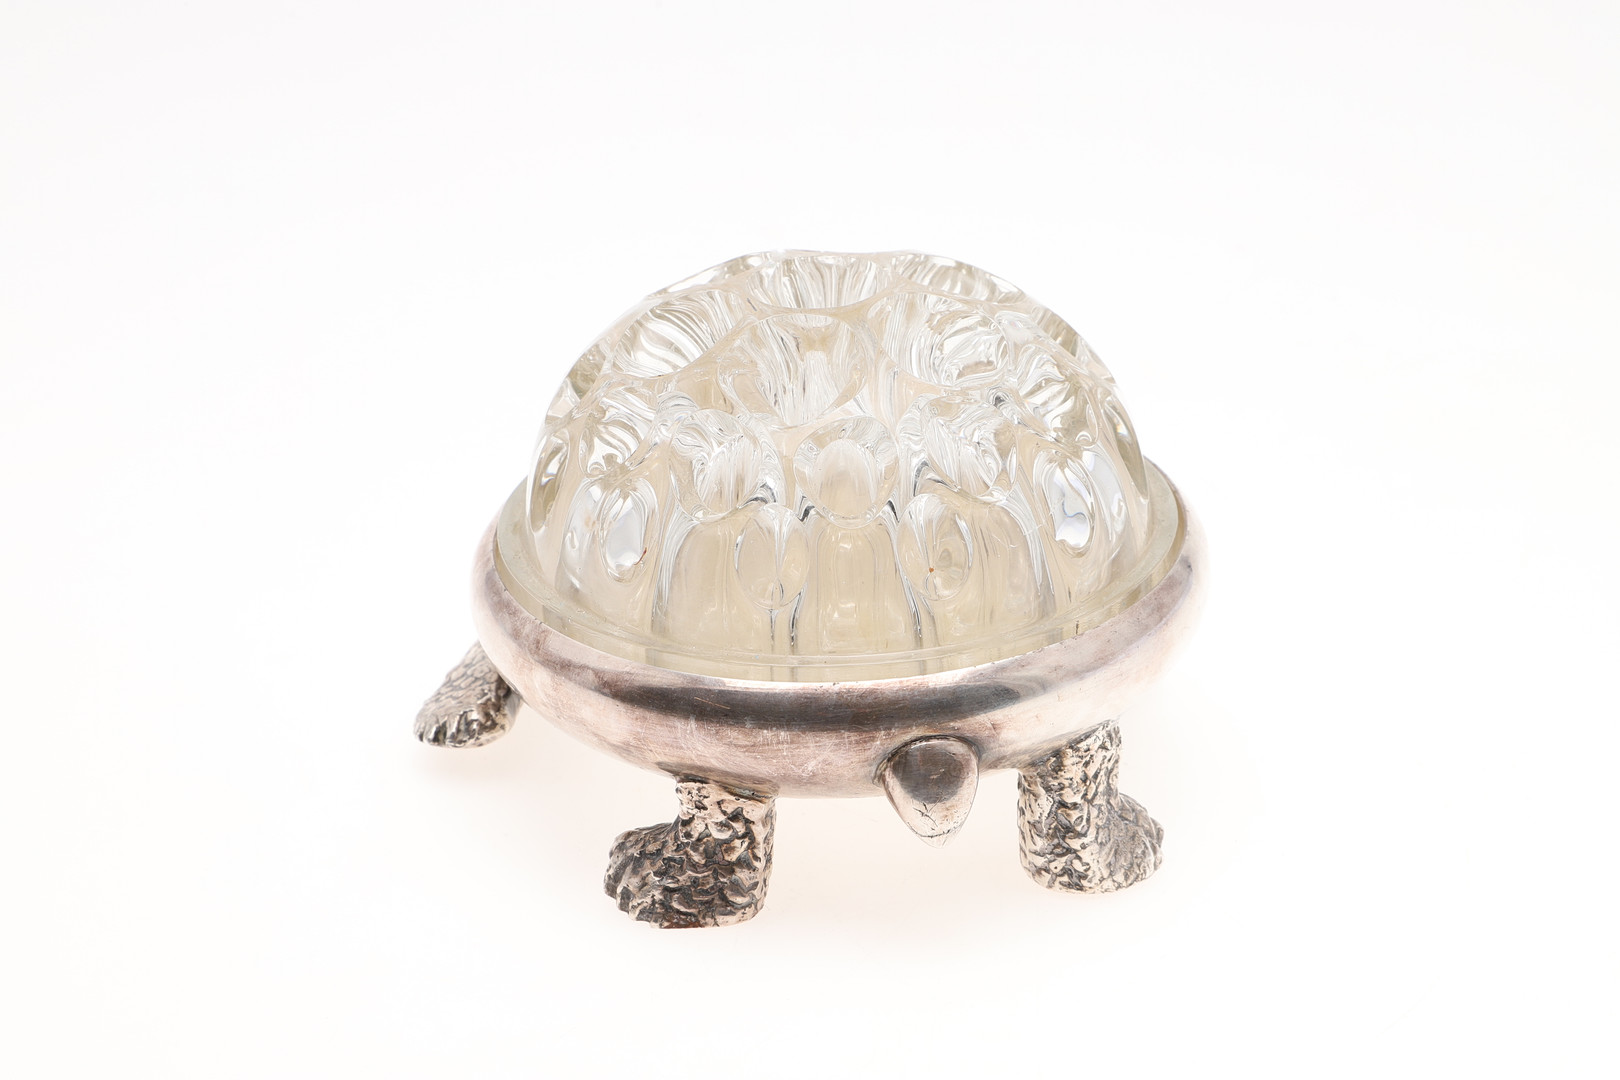 A LATE 19TH/ EARLY 20TH CENTURY CONTINENTAL GLASS MOUNTED SILVER TABLE DECORATION. - Image 3 of 6